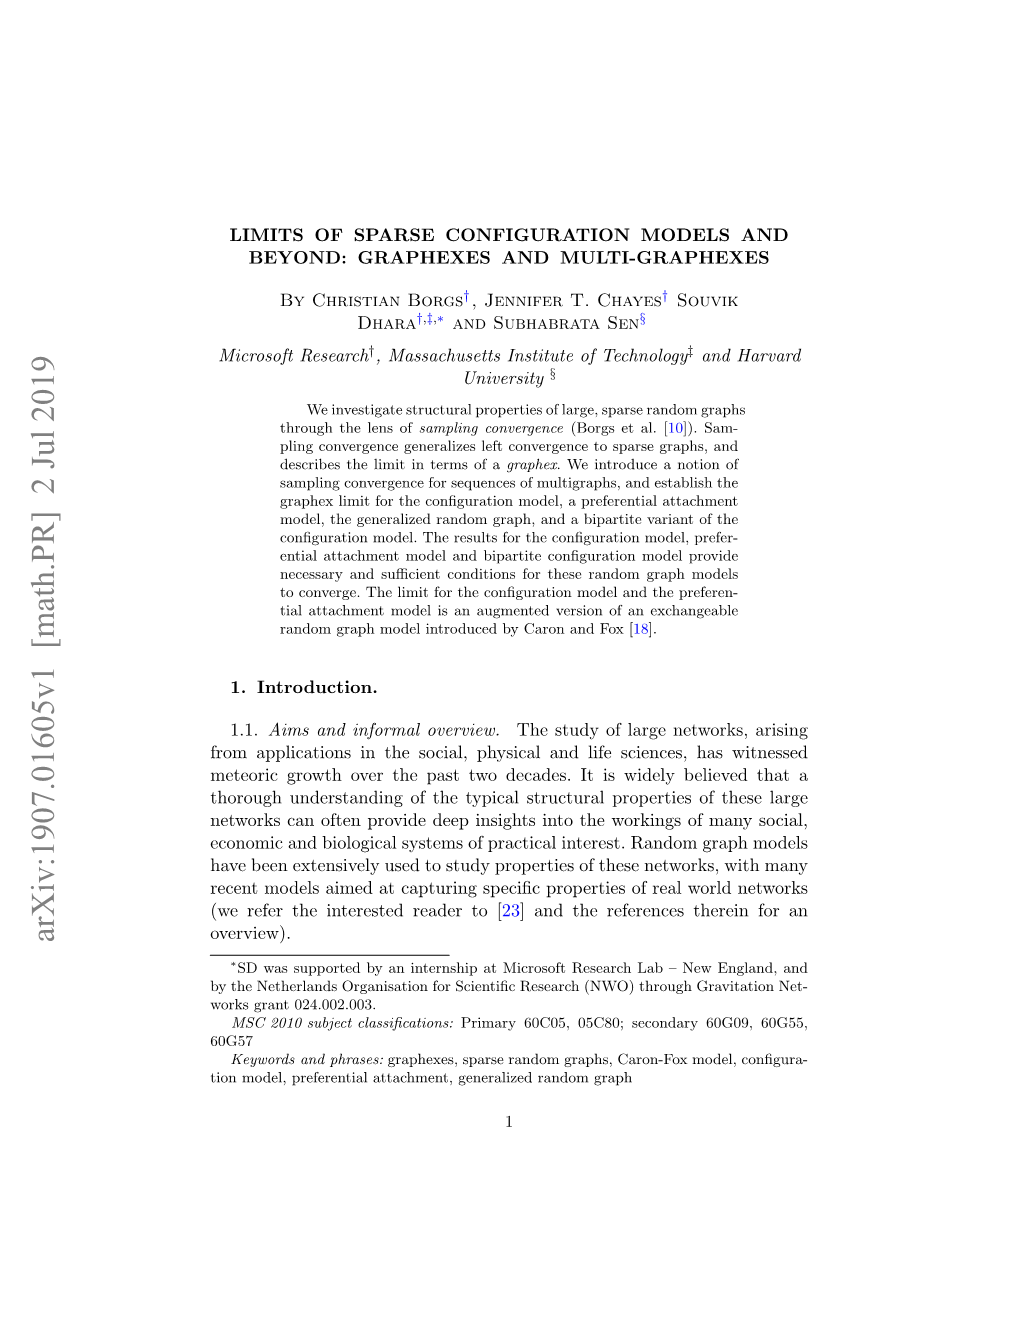 Limits of Sparse Configuration Models and Beyond: Graphexes and Multi-Graphexes